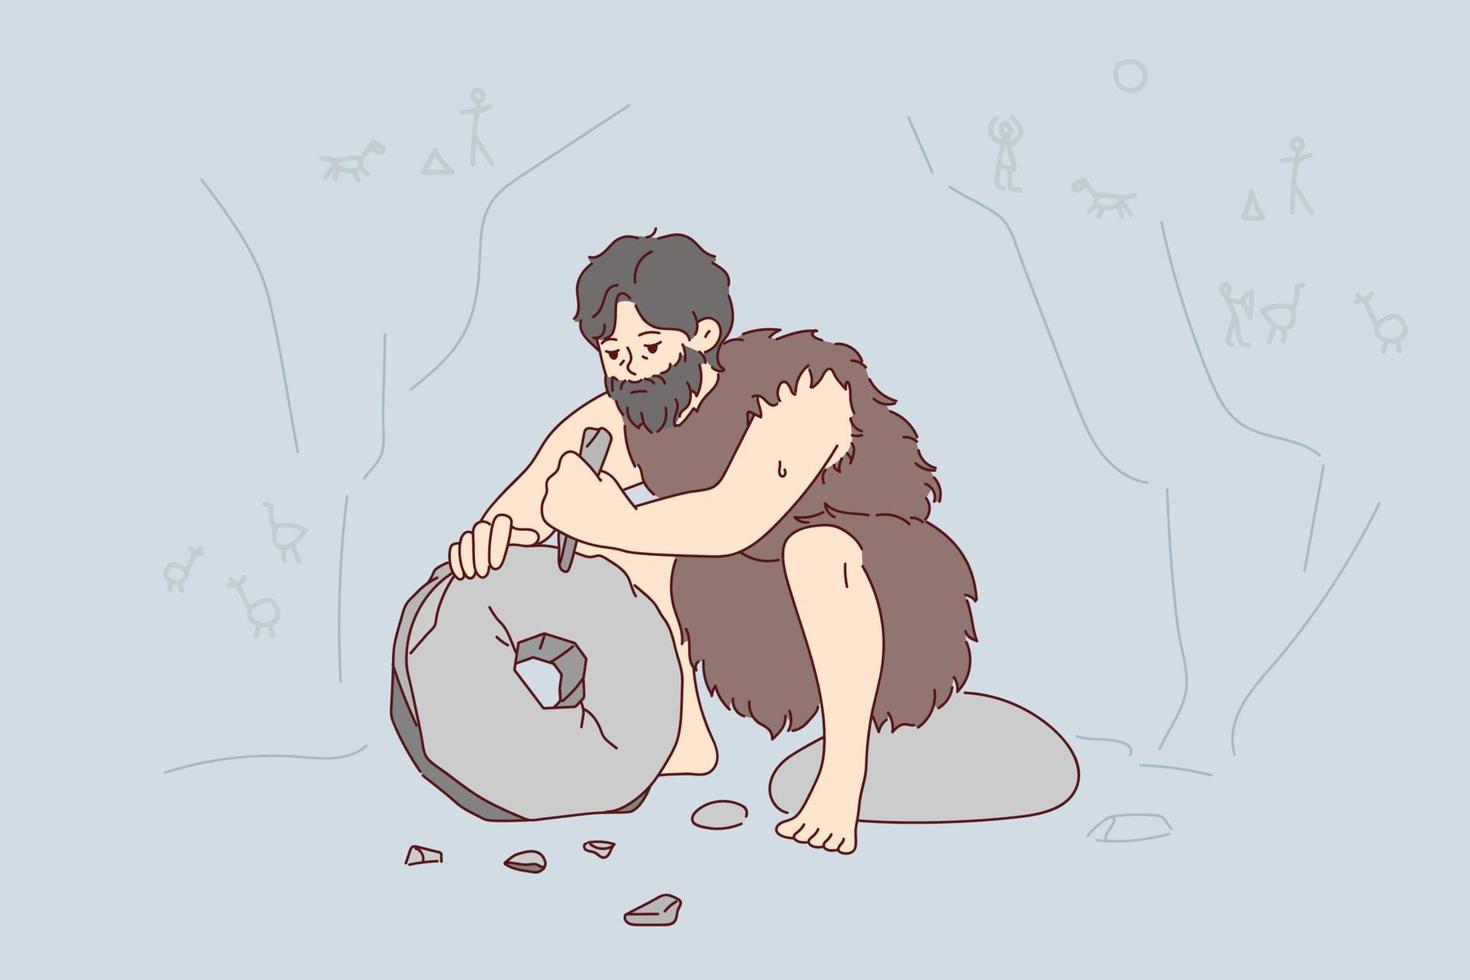 Ancient man with beard who lives in cave uses stone tool to create wheel. Neanderthal man in cloak made of animal skin invents primitive devices for grinding grain. Flat vector illustration